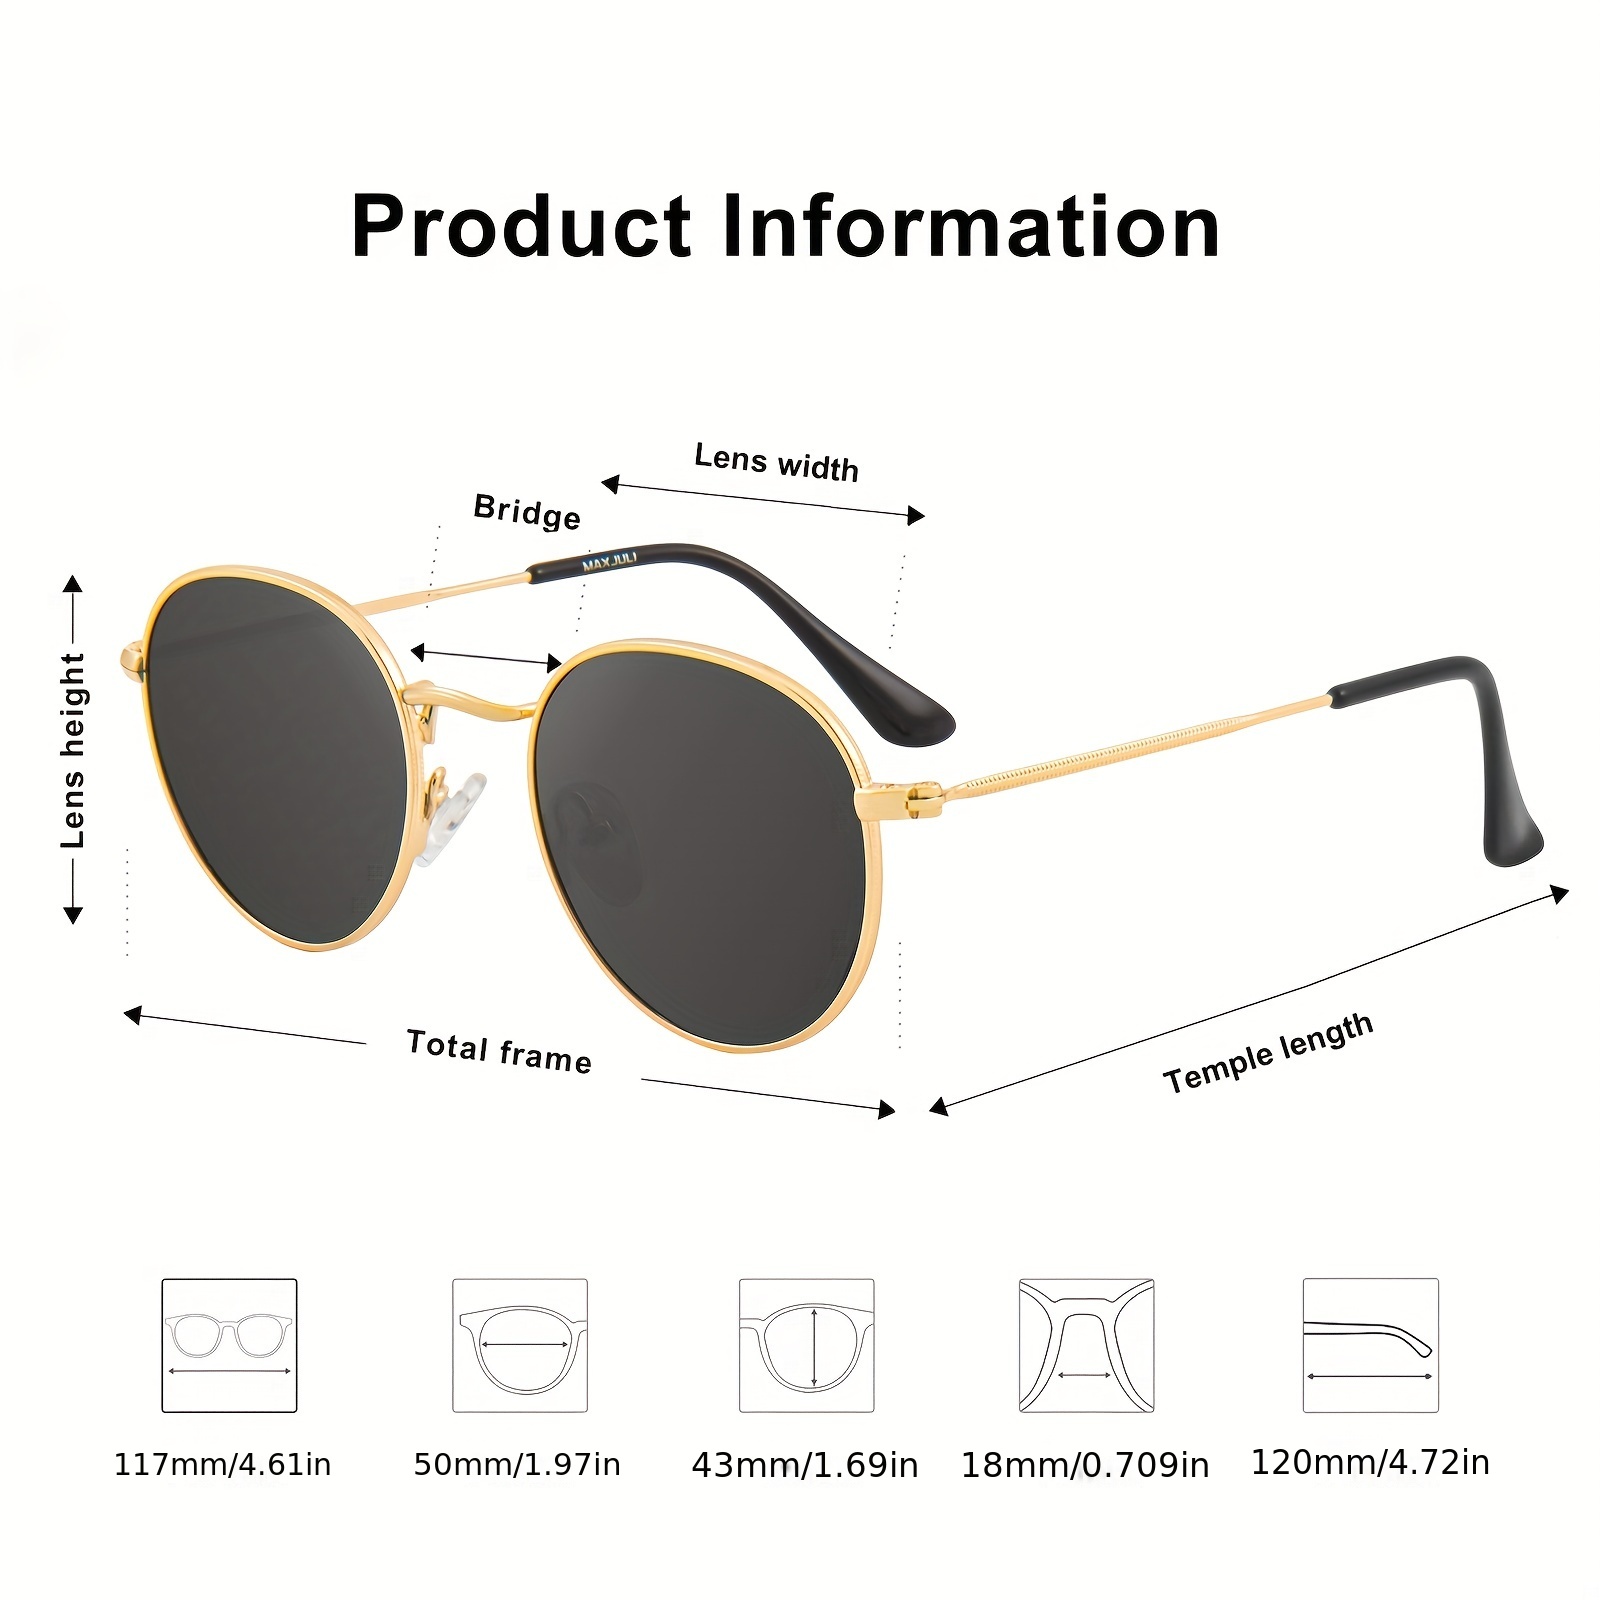 sun Glasses,pair Children's Scratch-Resistant Anti-Glare Polarized Sunglasses, with Ultra-Light Metal Frame and Soft Non-Slip Nose Pads, Suitable